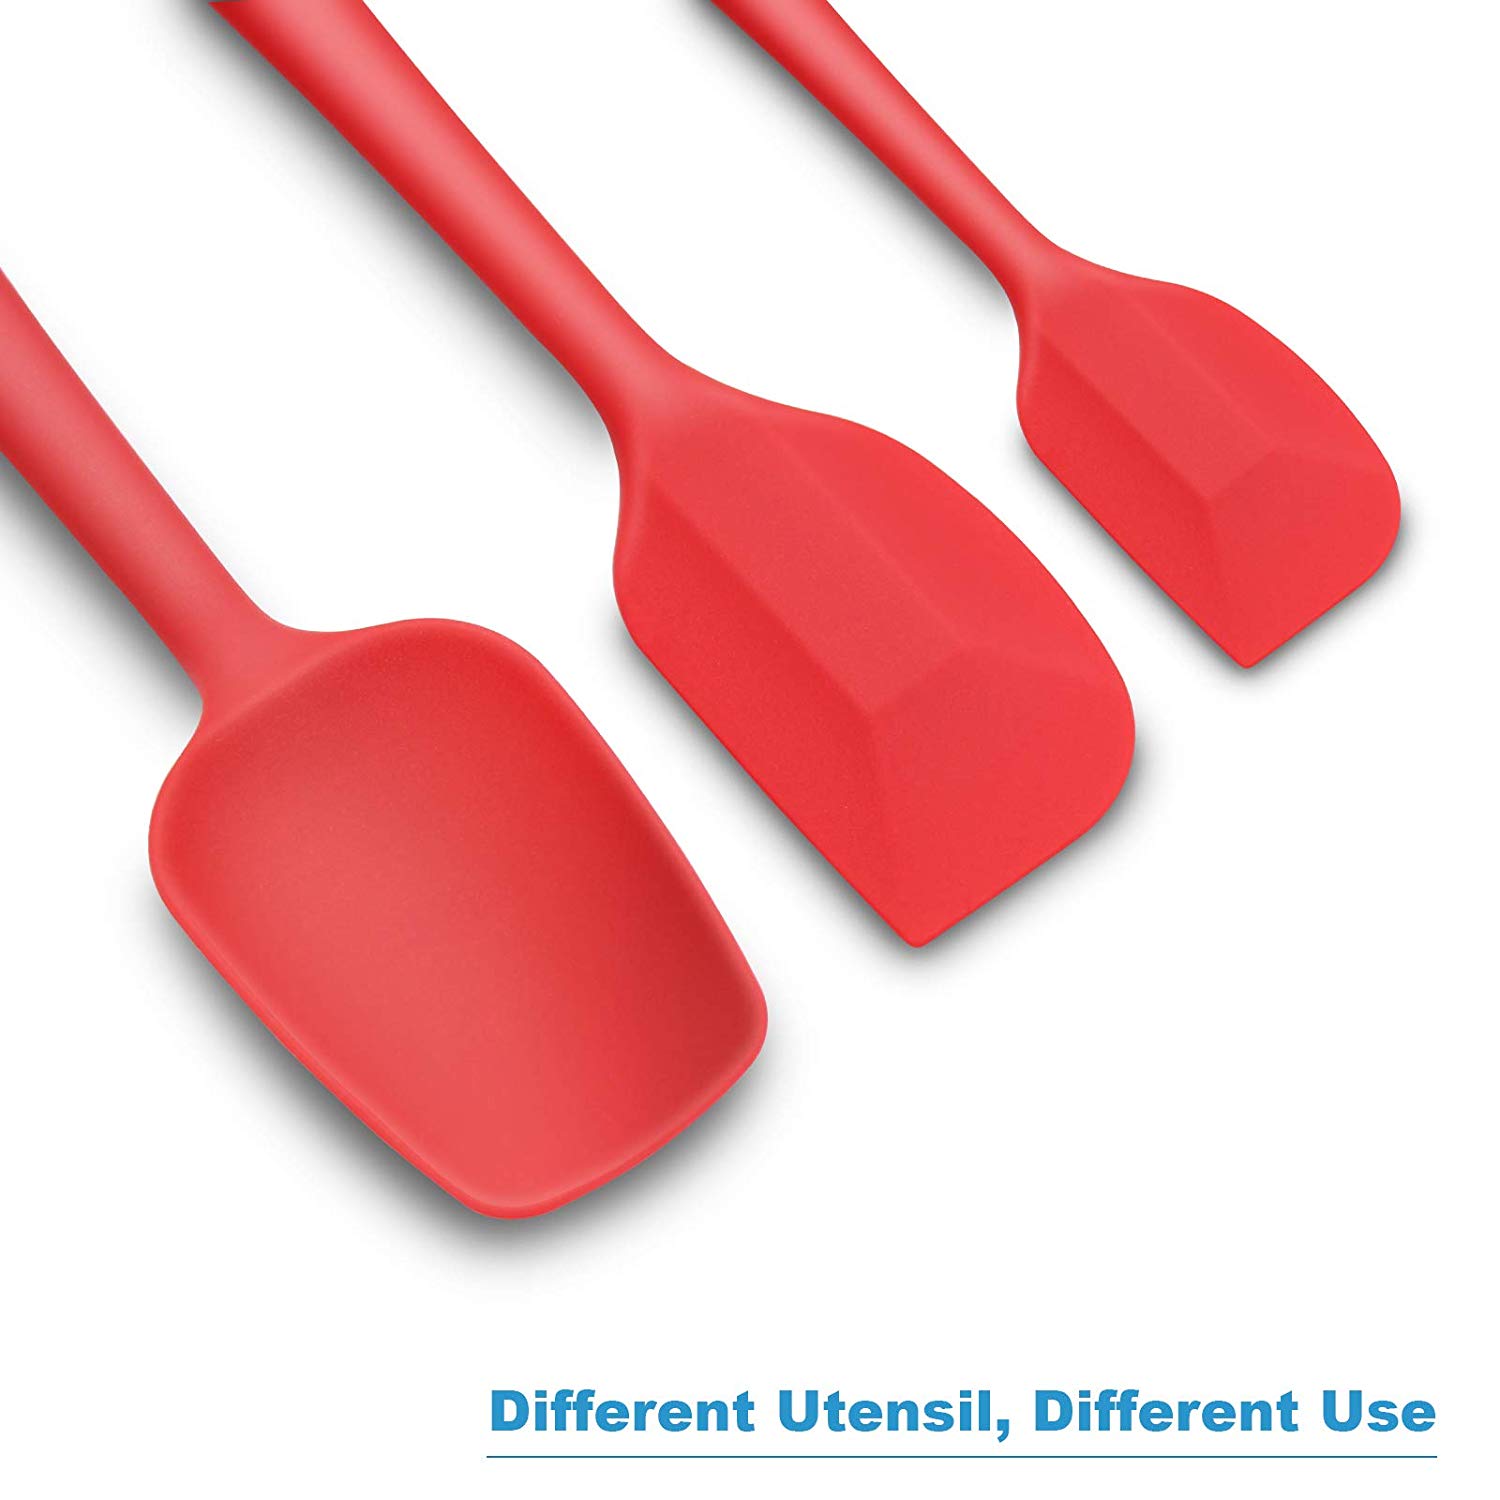 Silicone Spatula 3-piece Set, High Heat-Resistant Pro-Grade Spatulas, Non-stick Rubber Spatulas with Stainless Steel Core, Red, I2341 - image 5 of 7